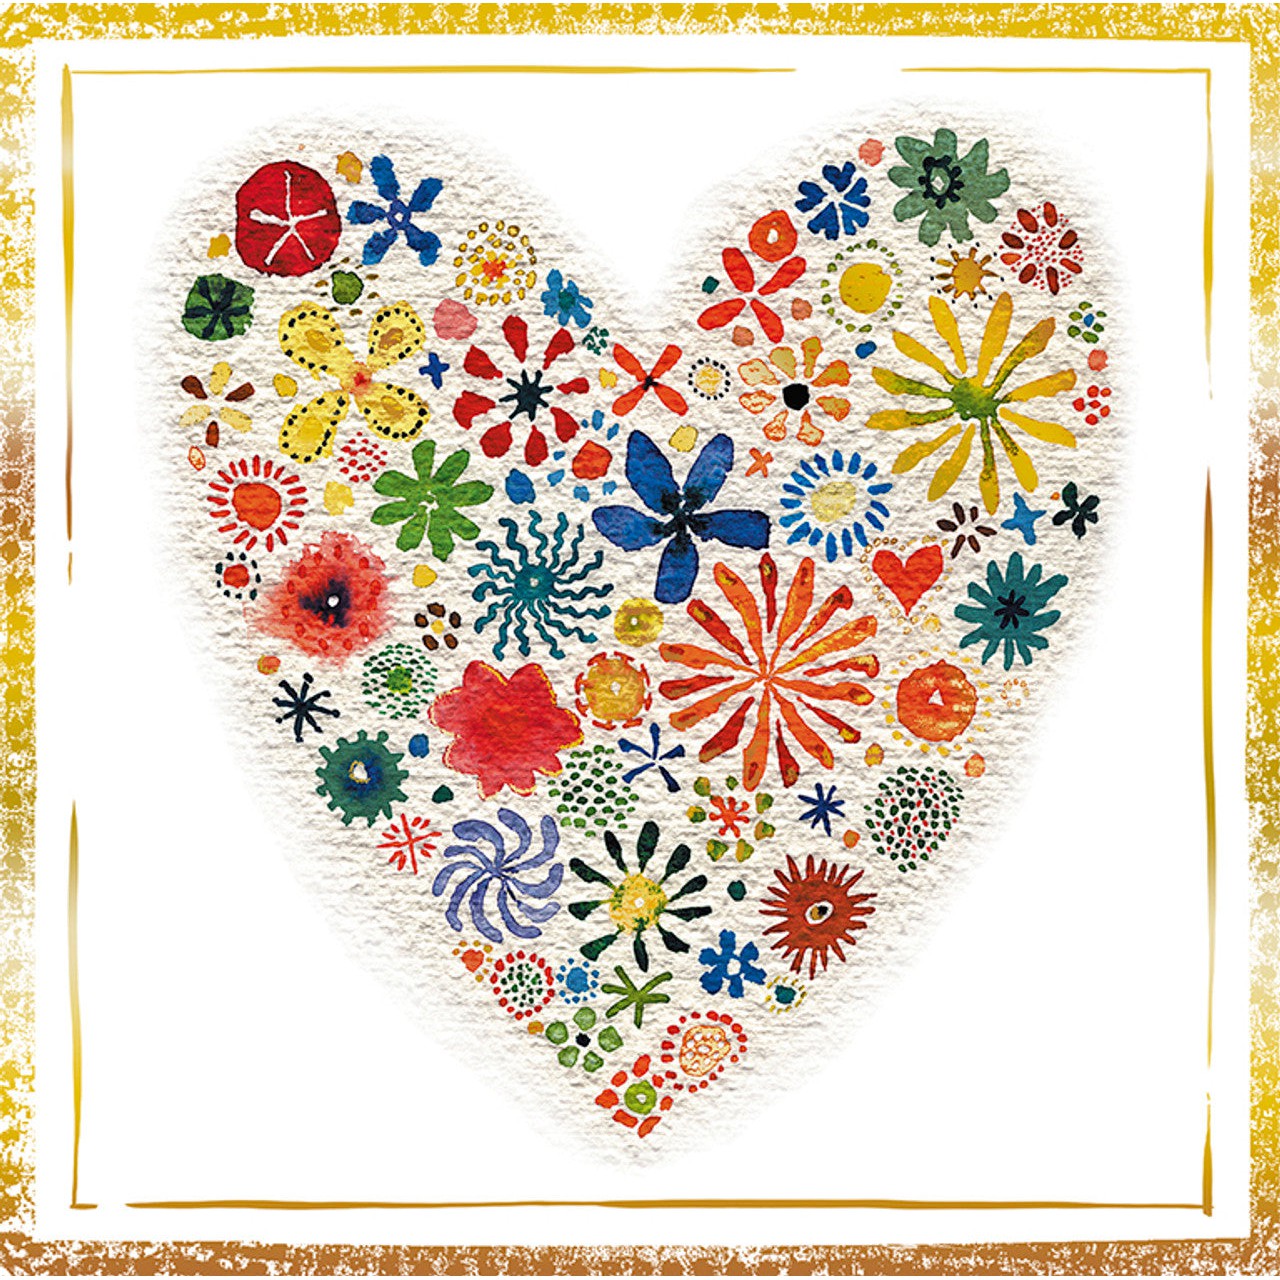 Heart Of Flowers By John S. Dykes Greeting Card